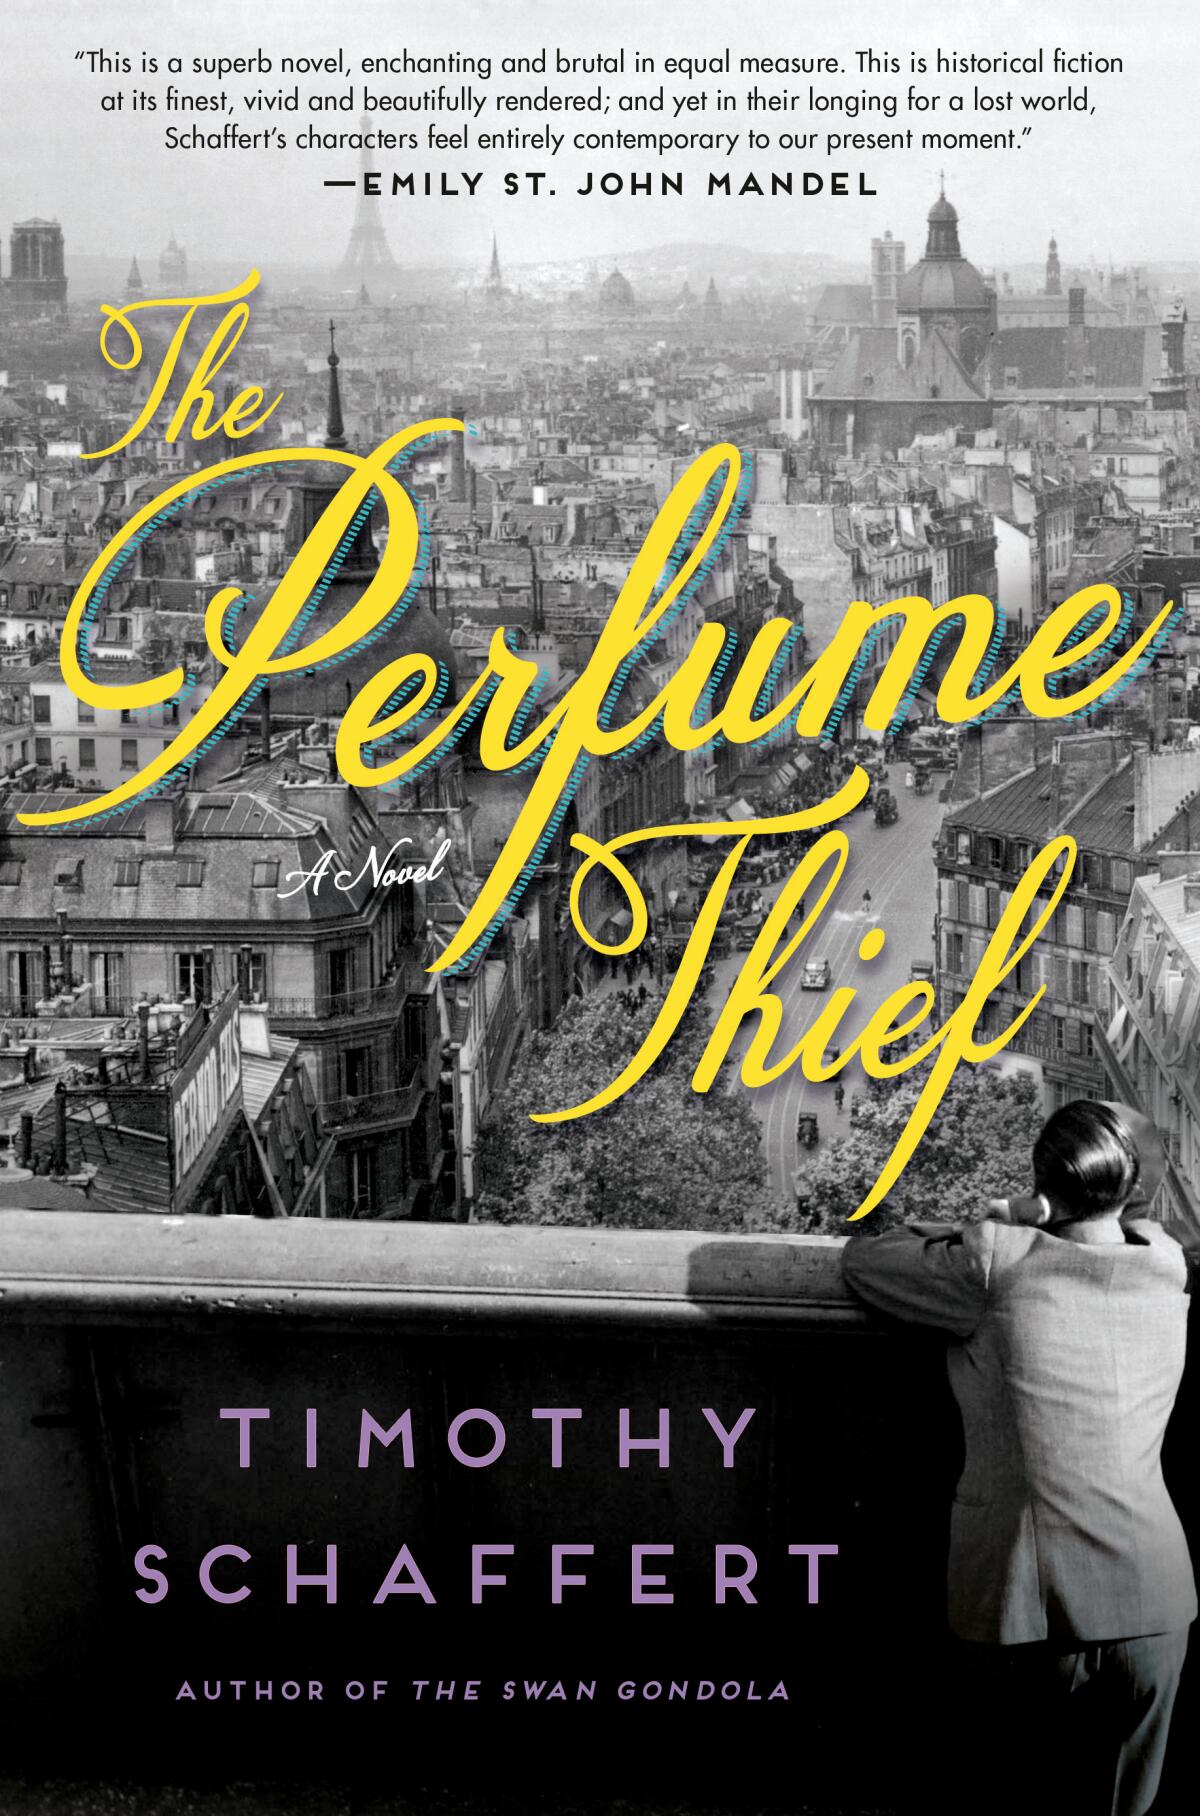 The cover of the book "The Perfume Thief," by Timothy Schaffert